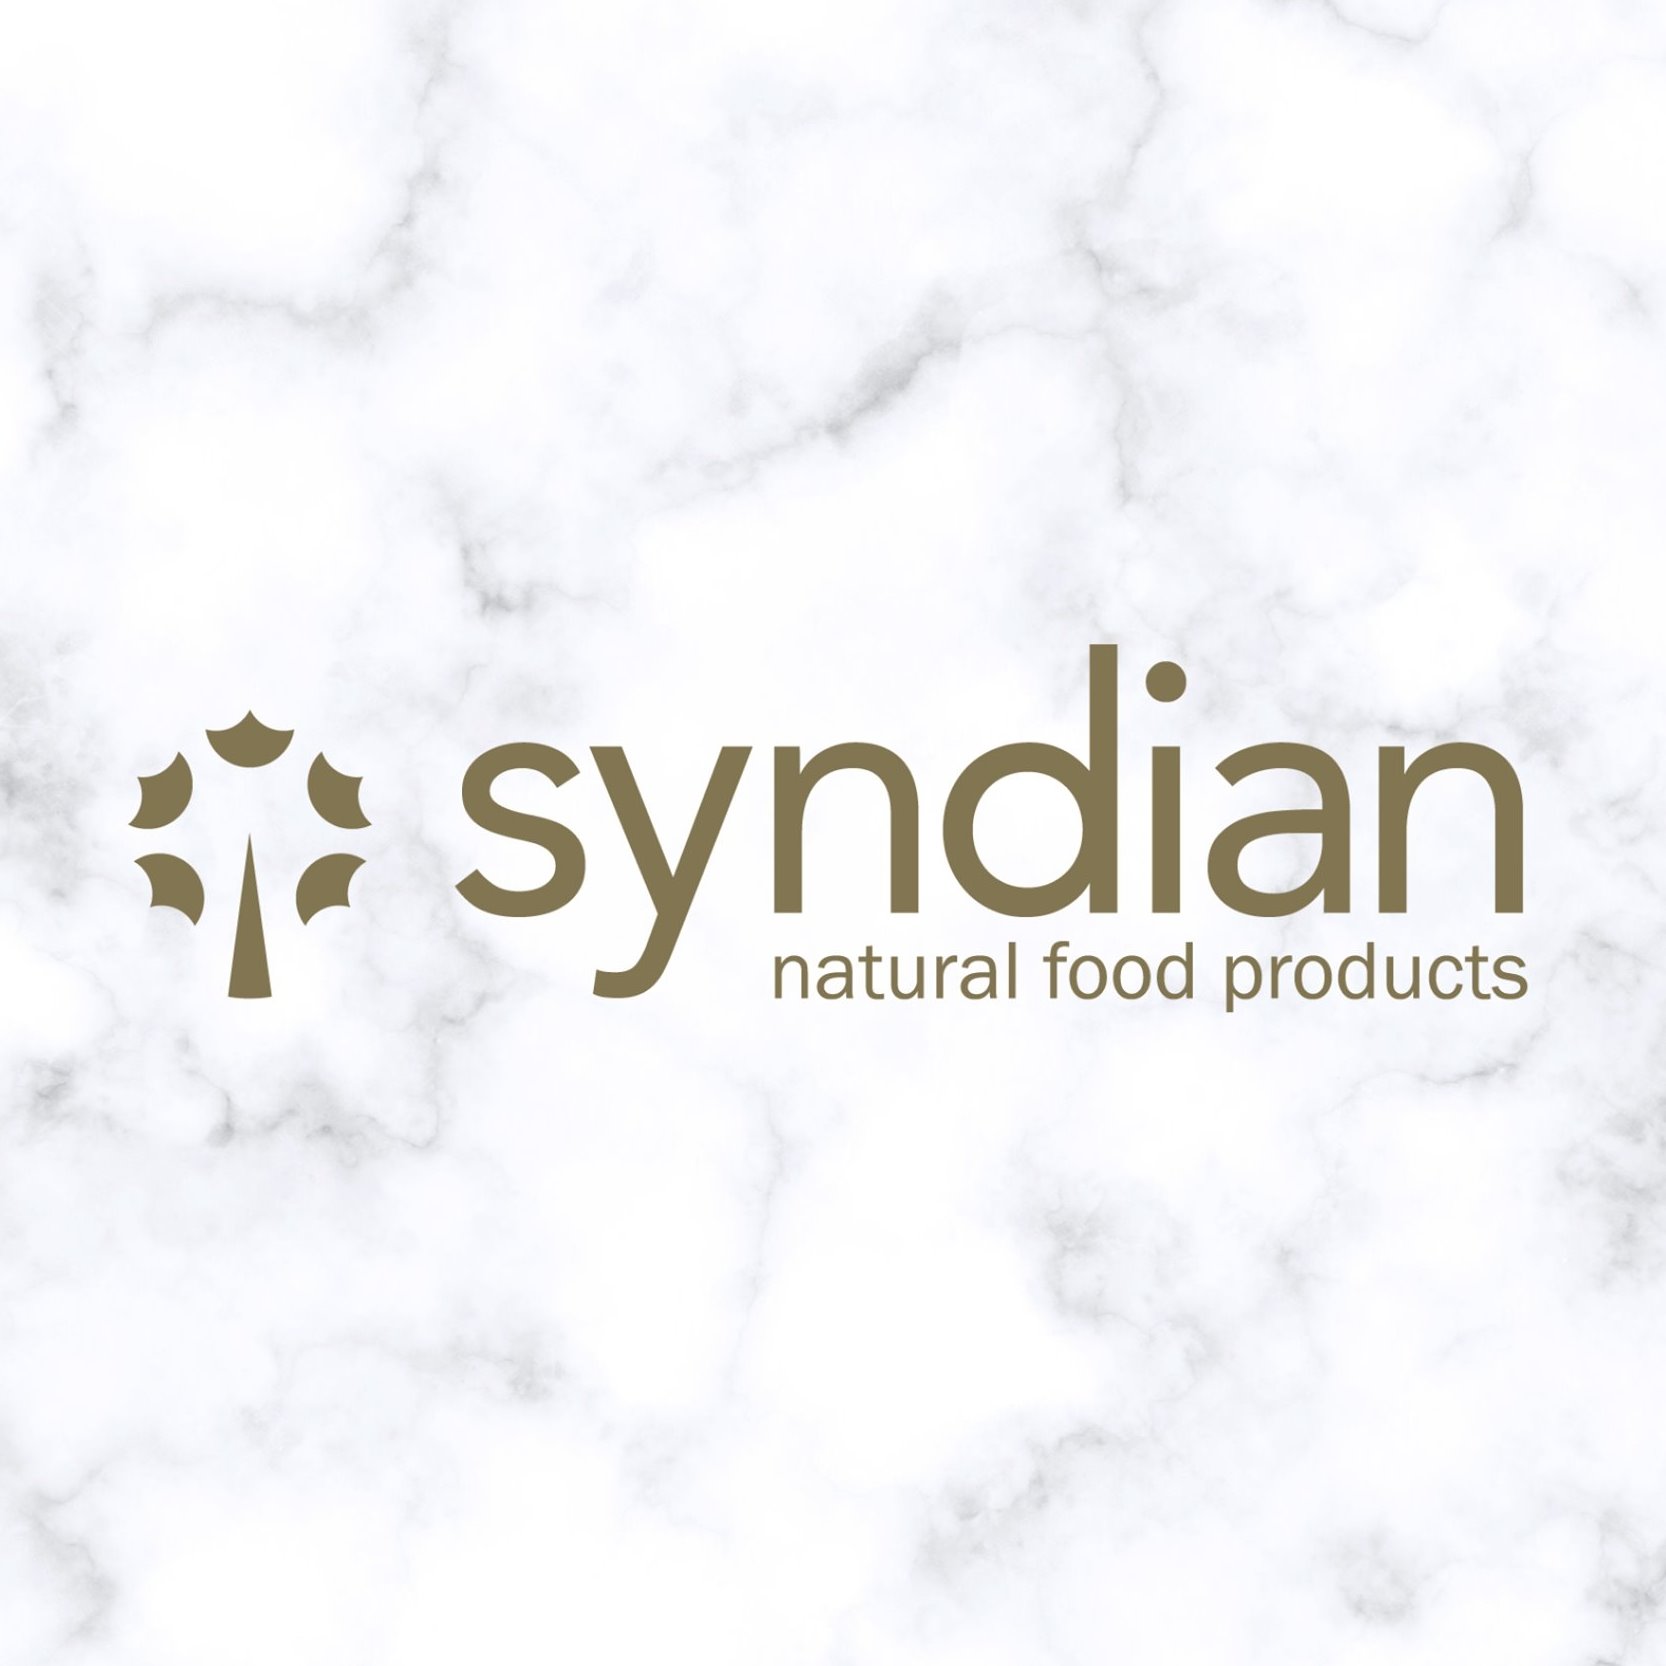 Syndian Natural Food Products Australia vegan finds & options